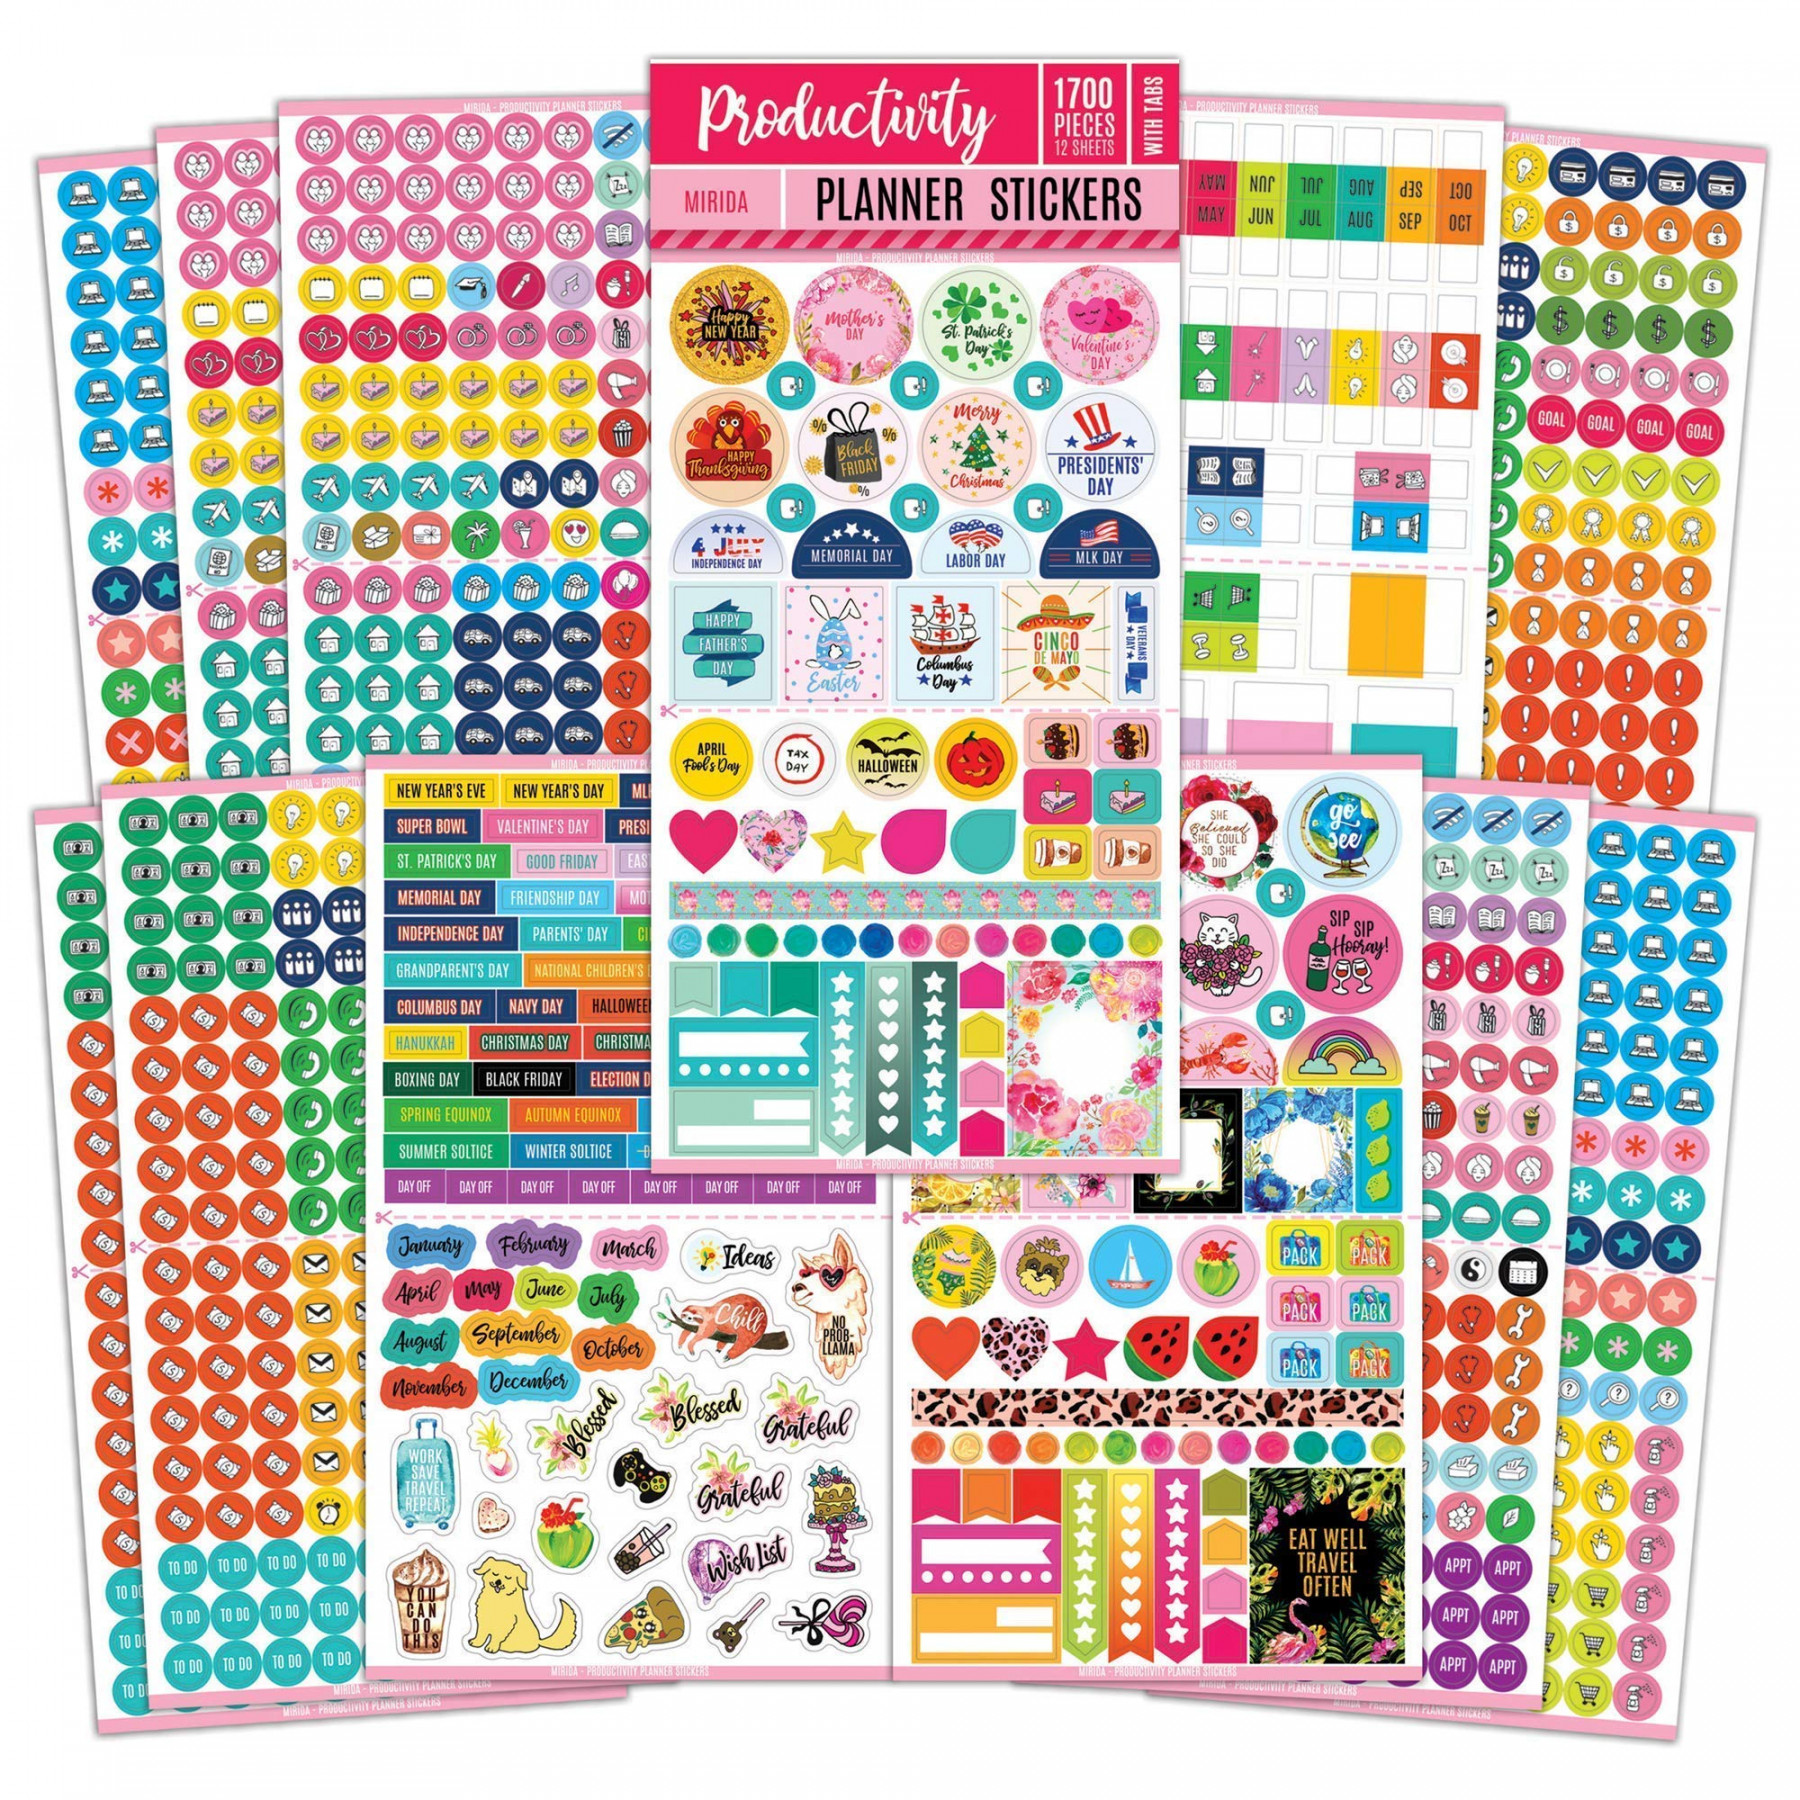 Mirida Planner Stickers –  Productivity Mini Icons for Adults Calendar  – Work, Daily To Do, BudgSee more Mirida Planner Stickers –